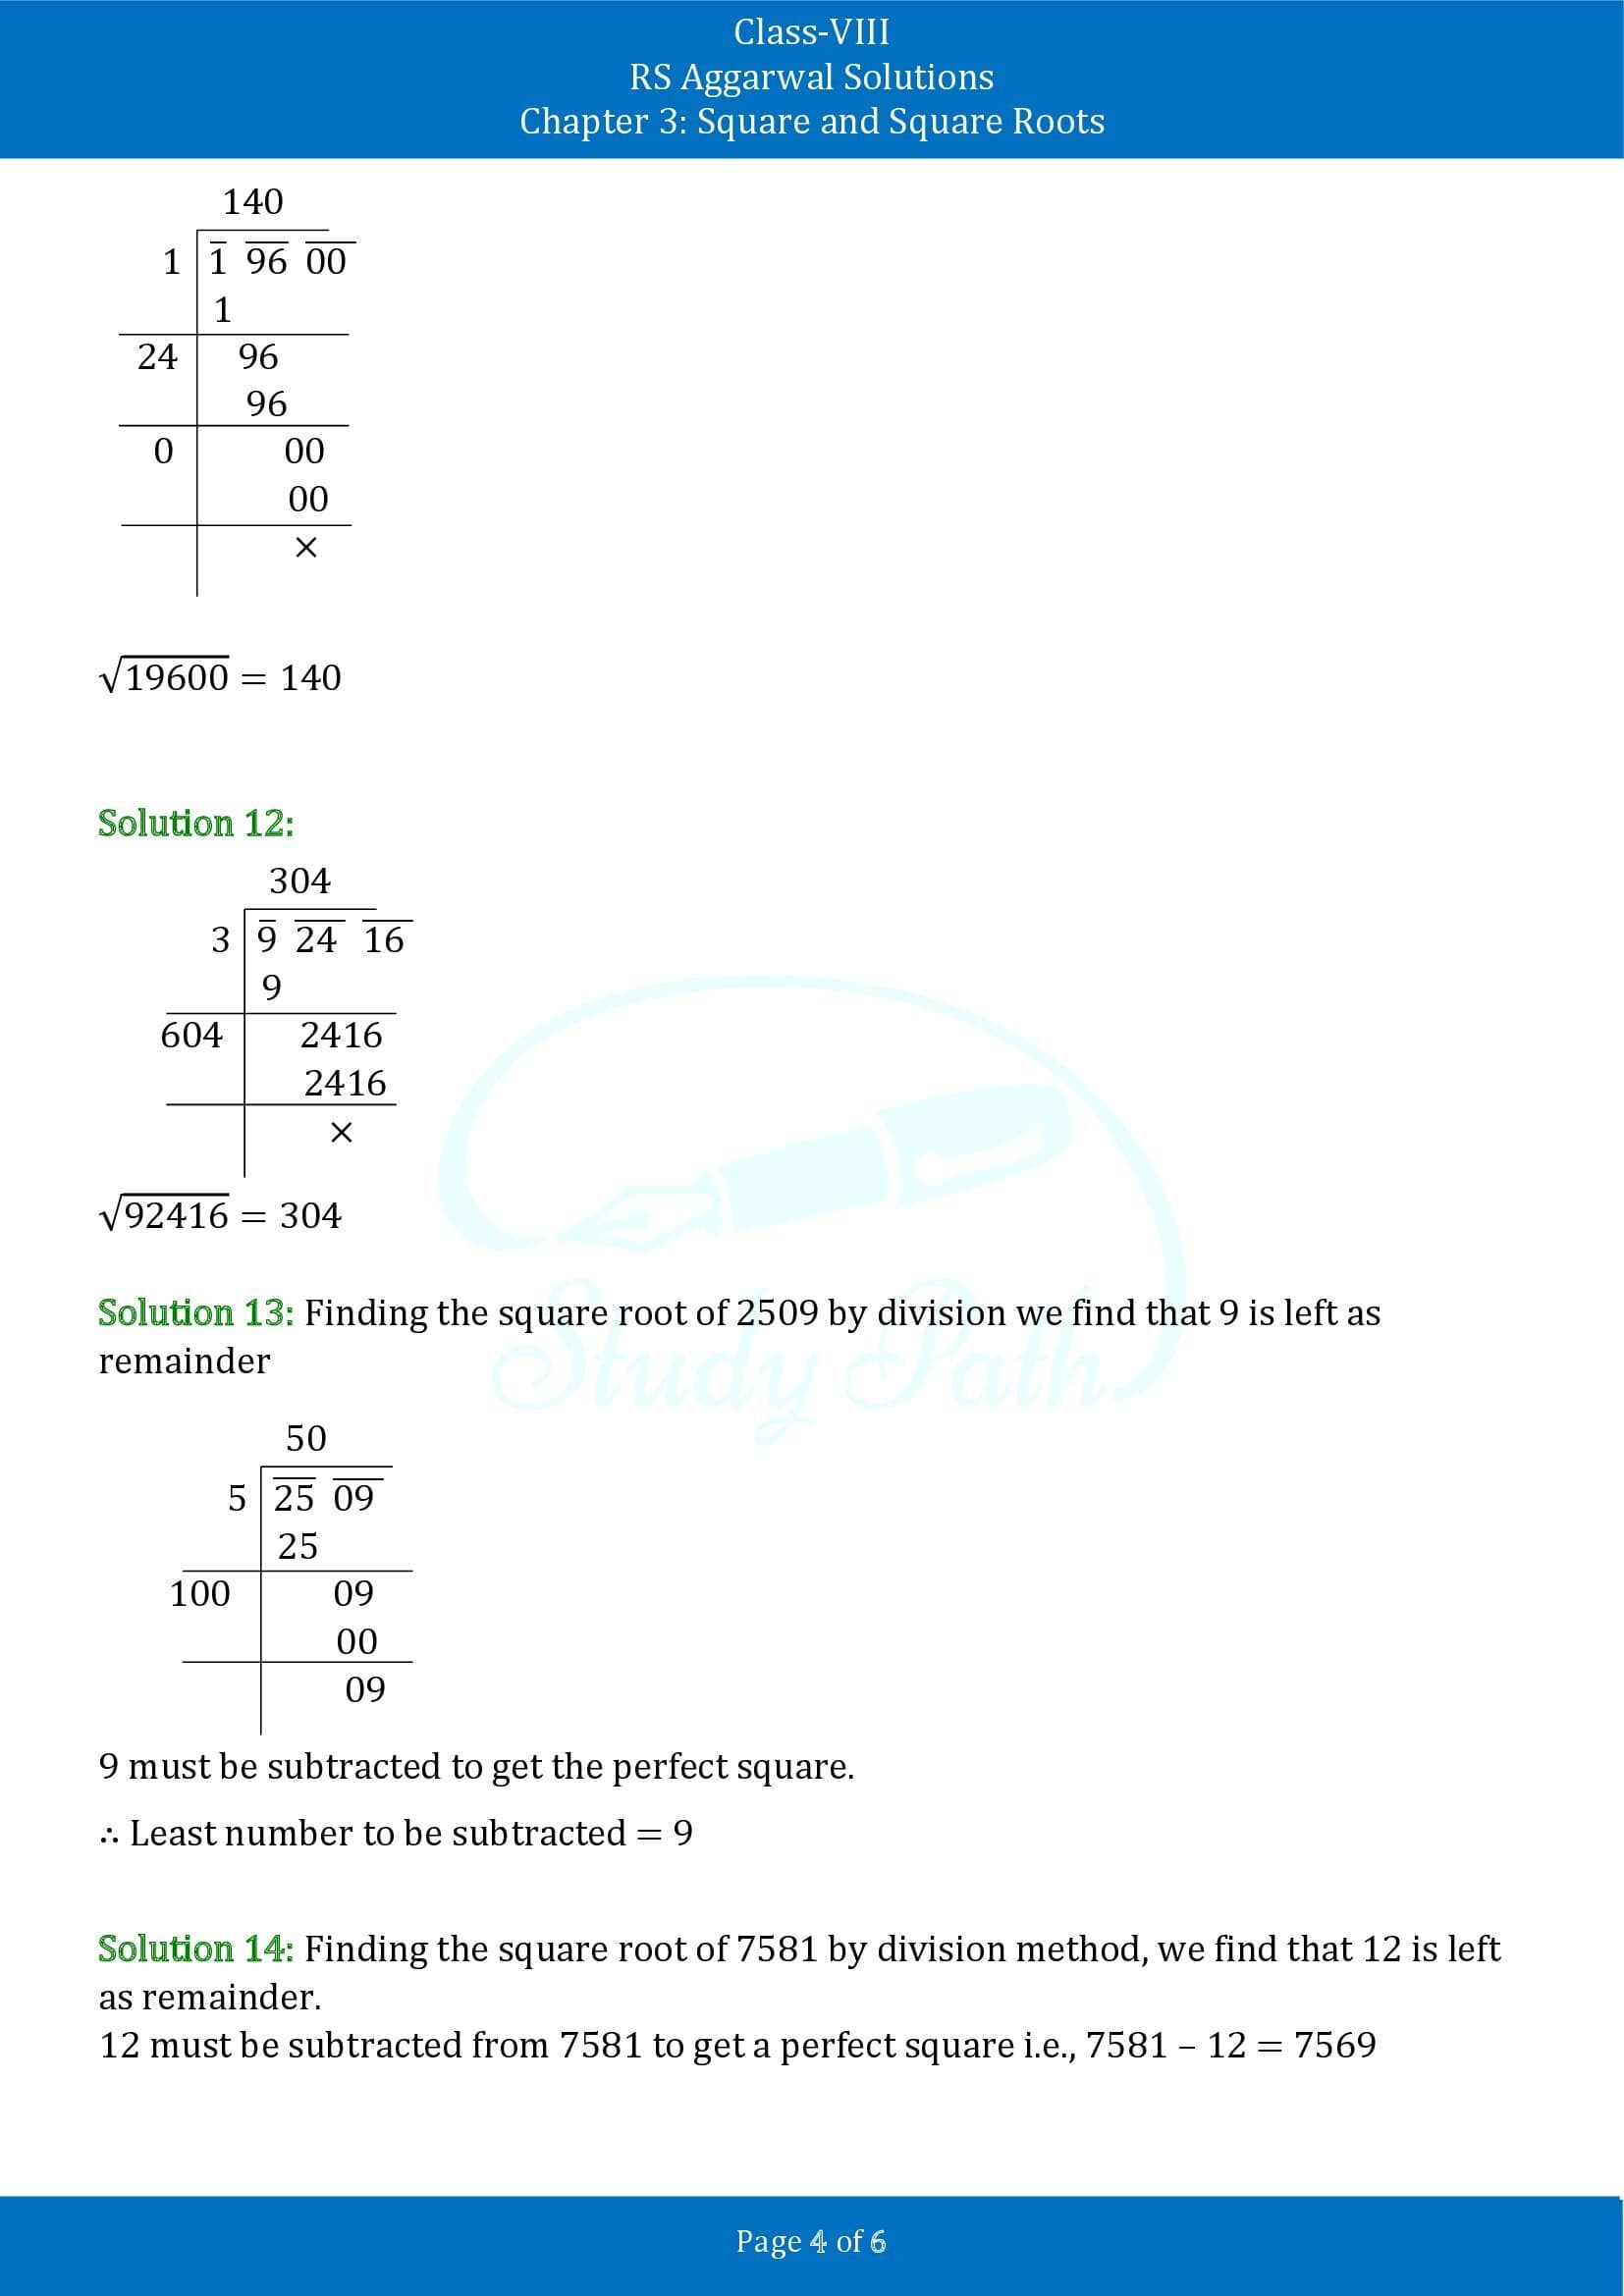 RS Aggarwal Solutions Class 8 Chapter 3 Square and Square Roots Exercise 3E 00004